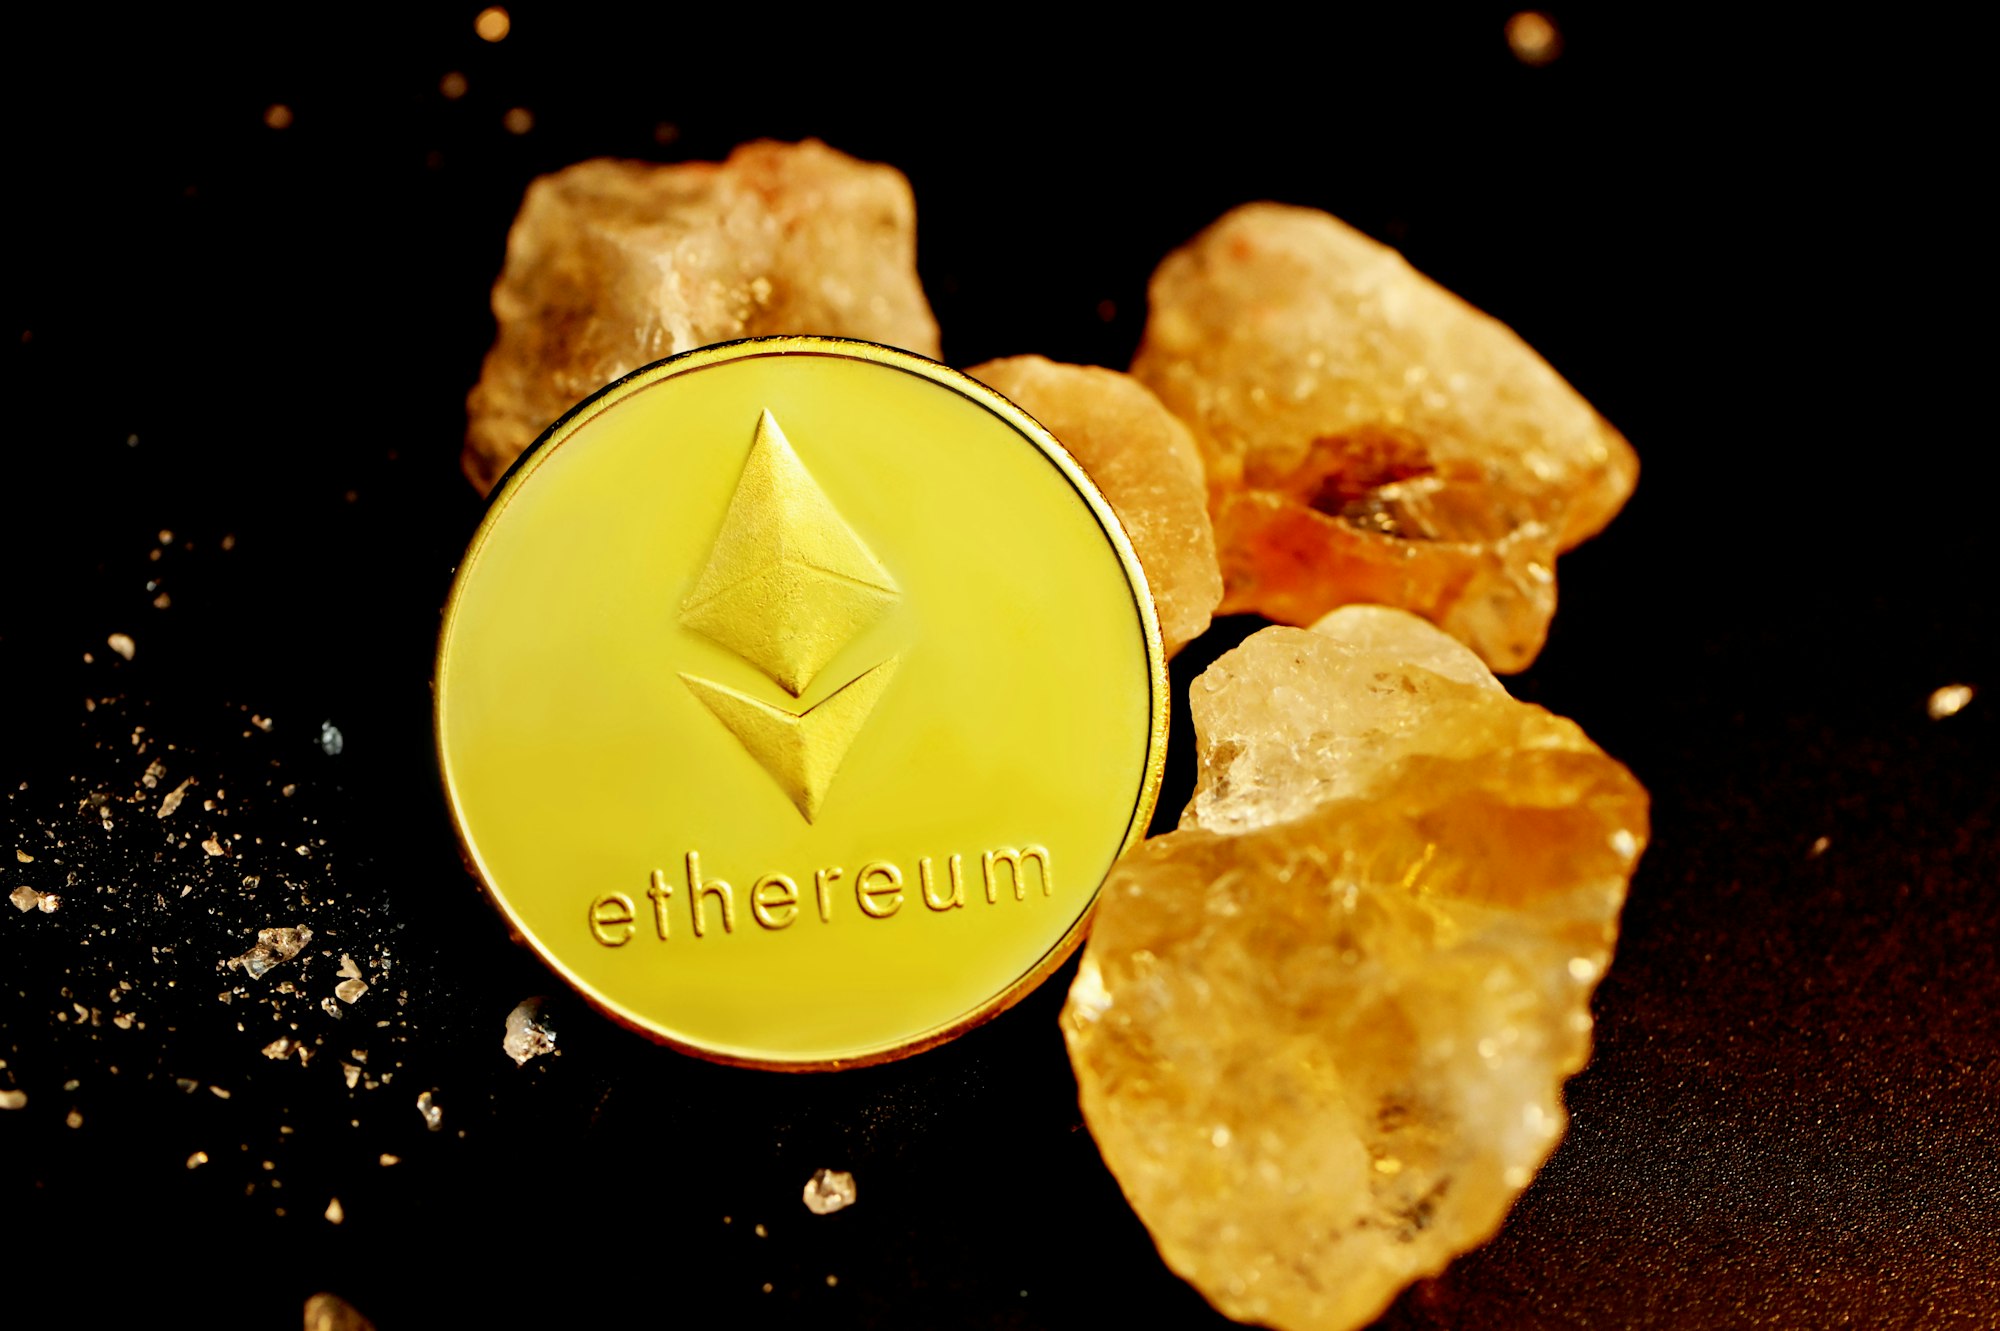 An Ethereum coin surrounded by crystals